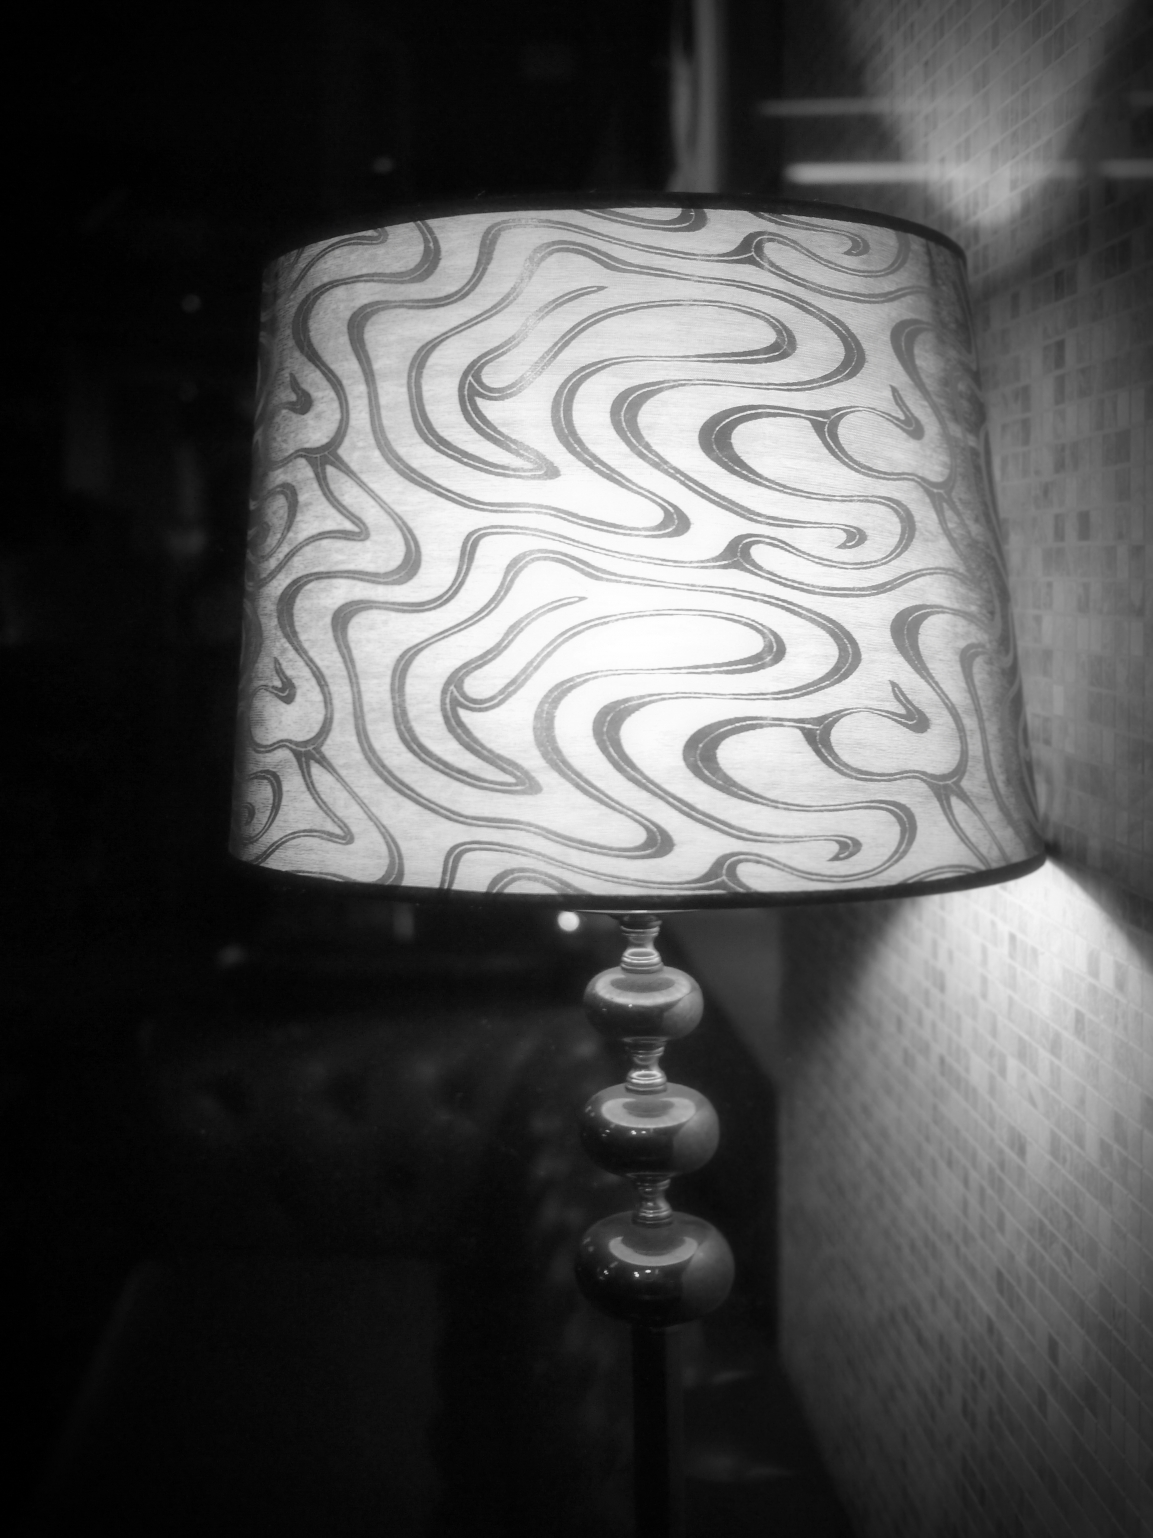 An old lamp